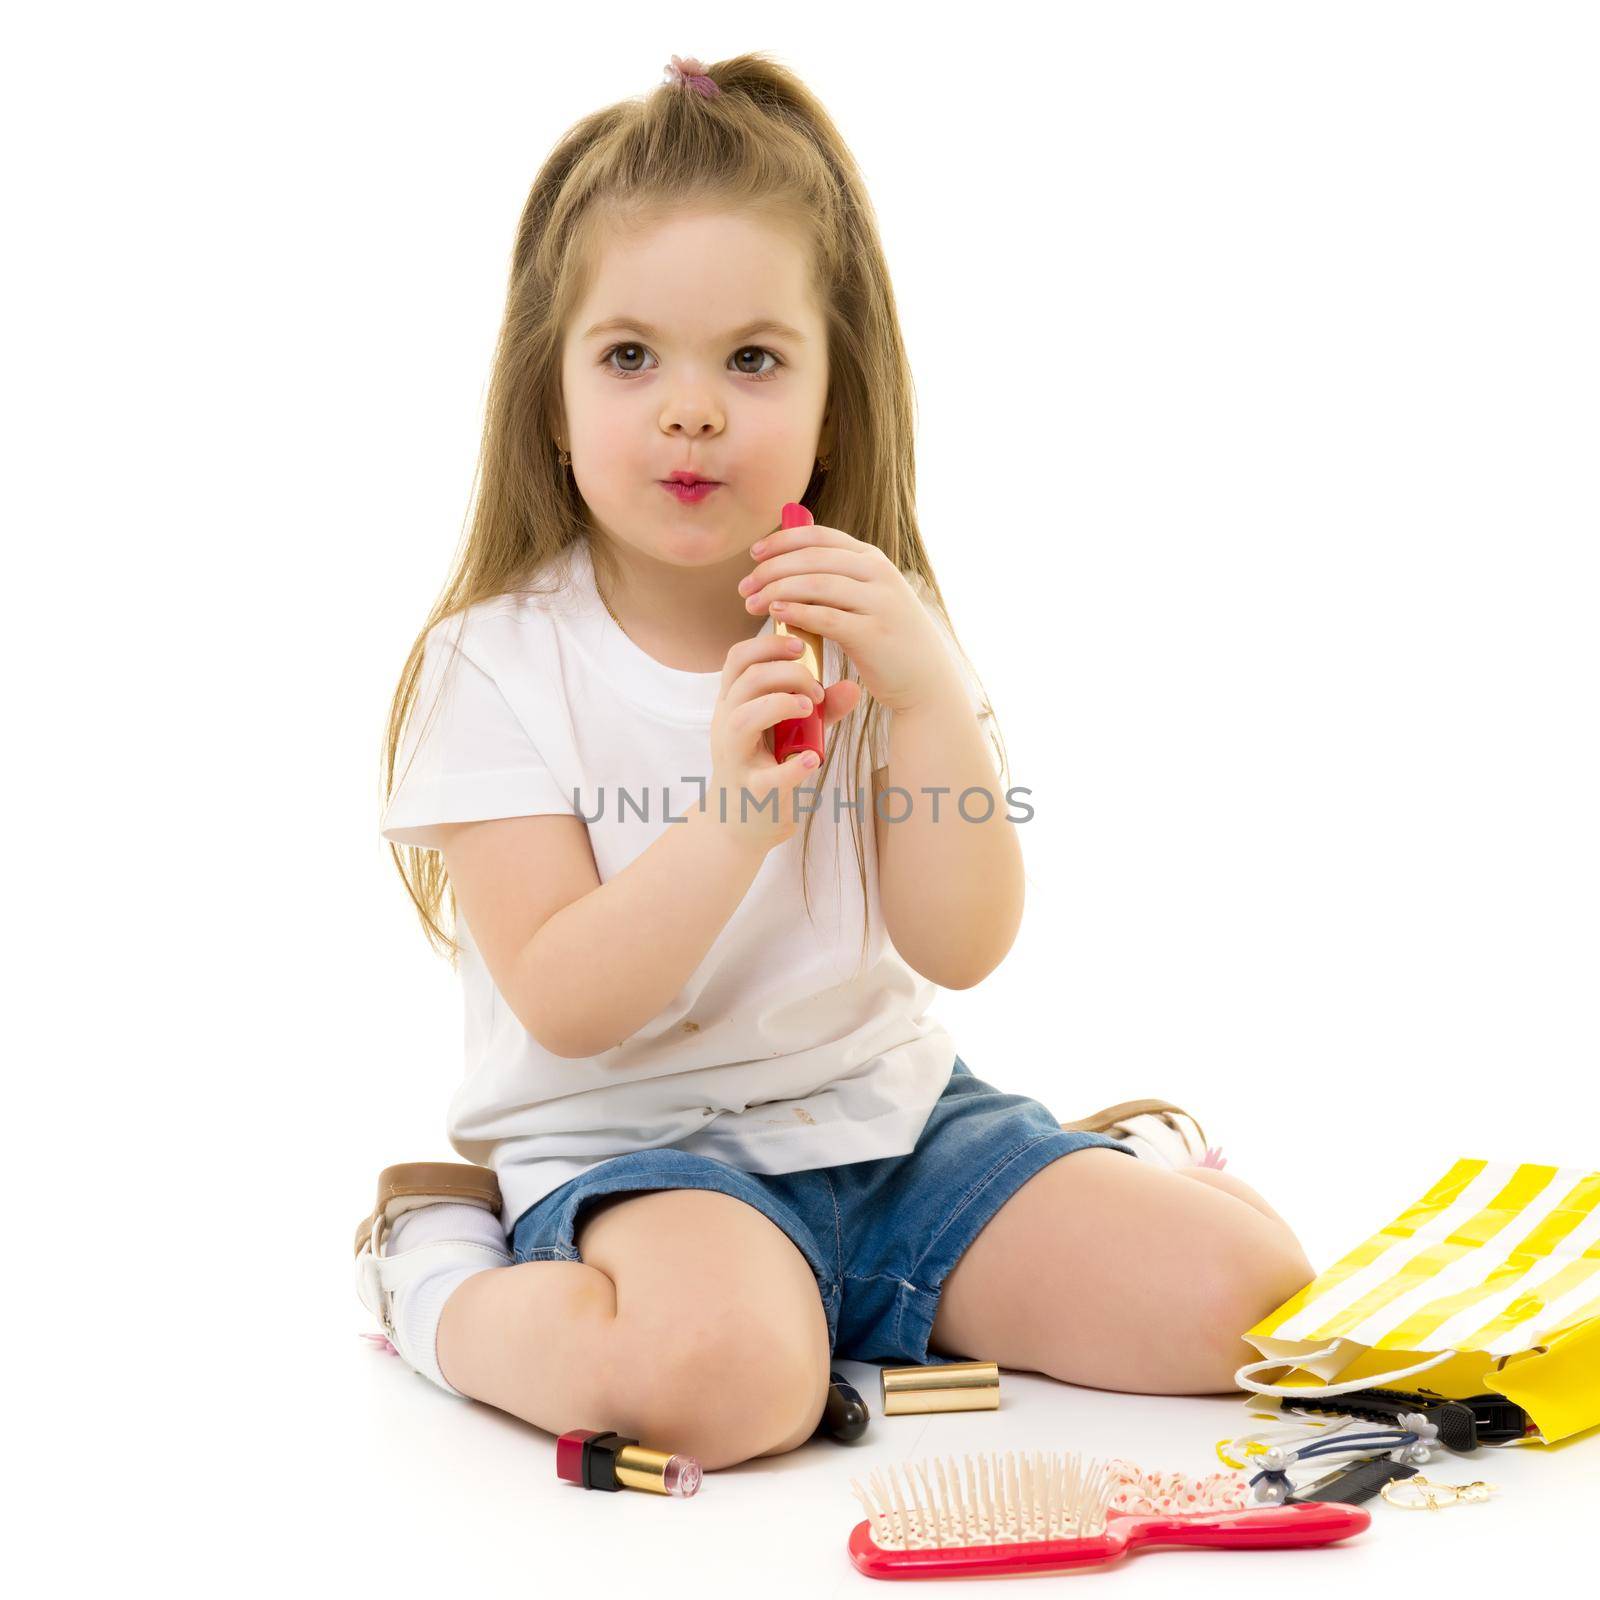 Cheerful little girl paints lips with mom's lipstick. The concept of beauty and fashion, family, advertising. Isolated on white background.